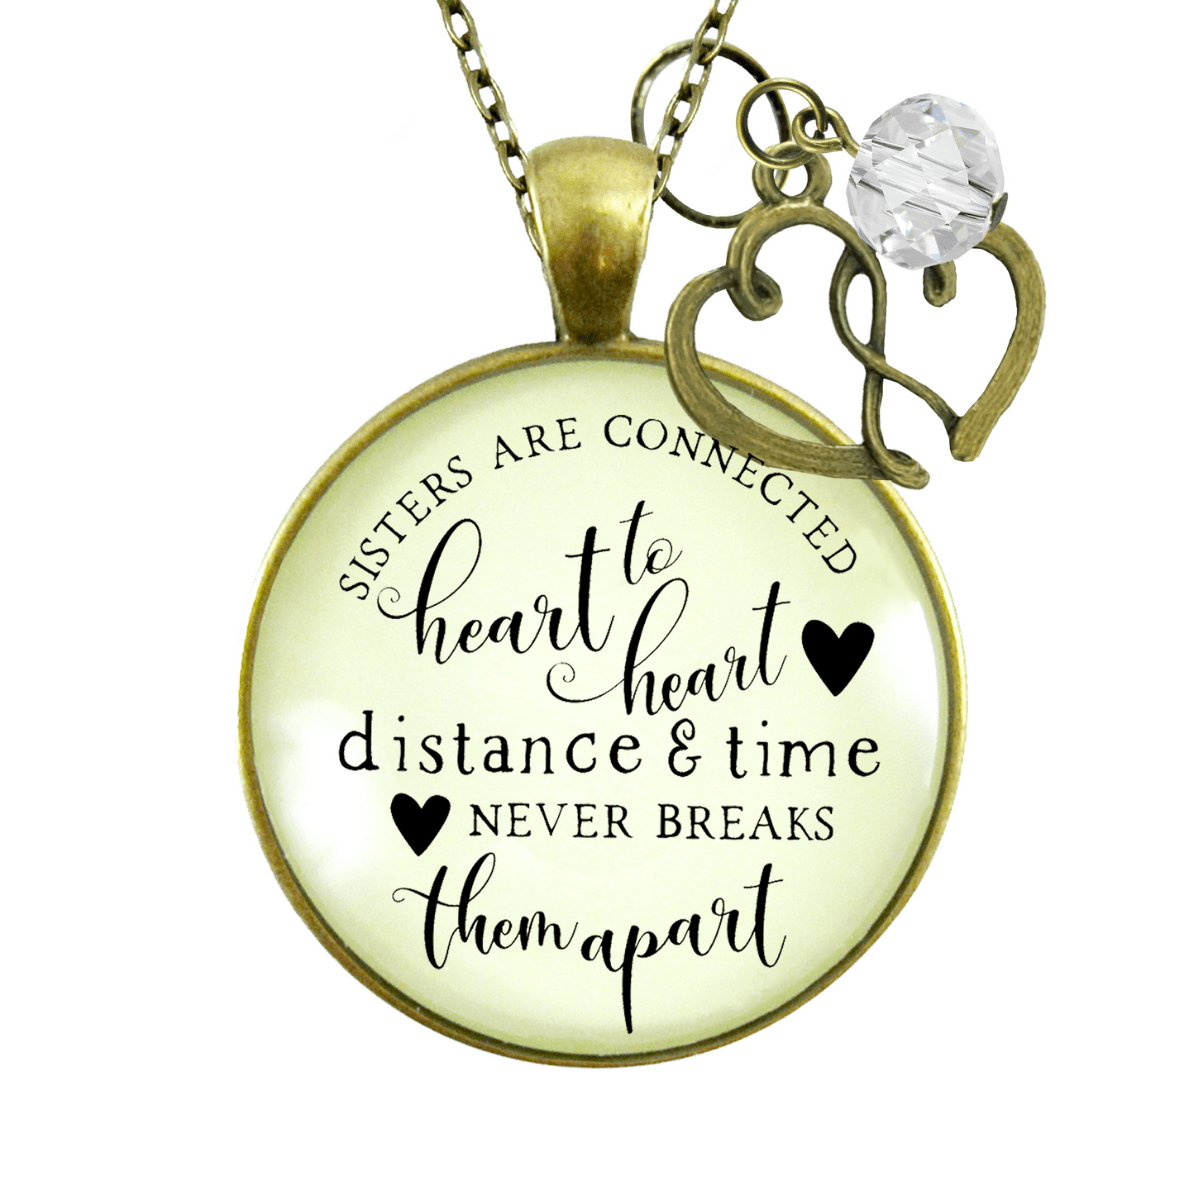 Gutsy Goodness Sisters are Connected Necklace Long Distance Friendship Jewelry Open Heart Charm - Gutsy Goodness Handmade Jewelry;Sisters Are Connected Necklace Long Distance Friendship Jewelry Open Heart Charm - Gutsy Goodness Handmade Jewelry Gifts